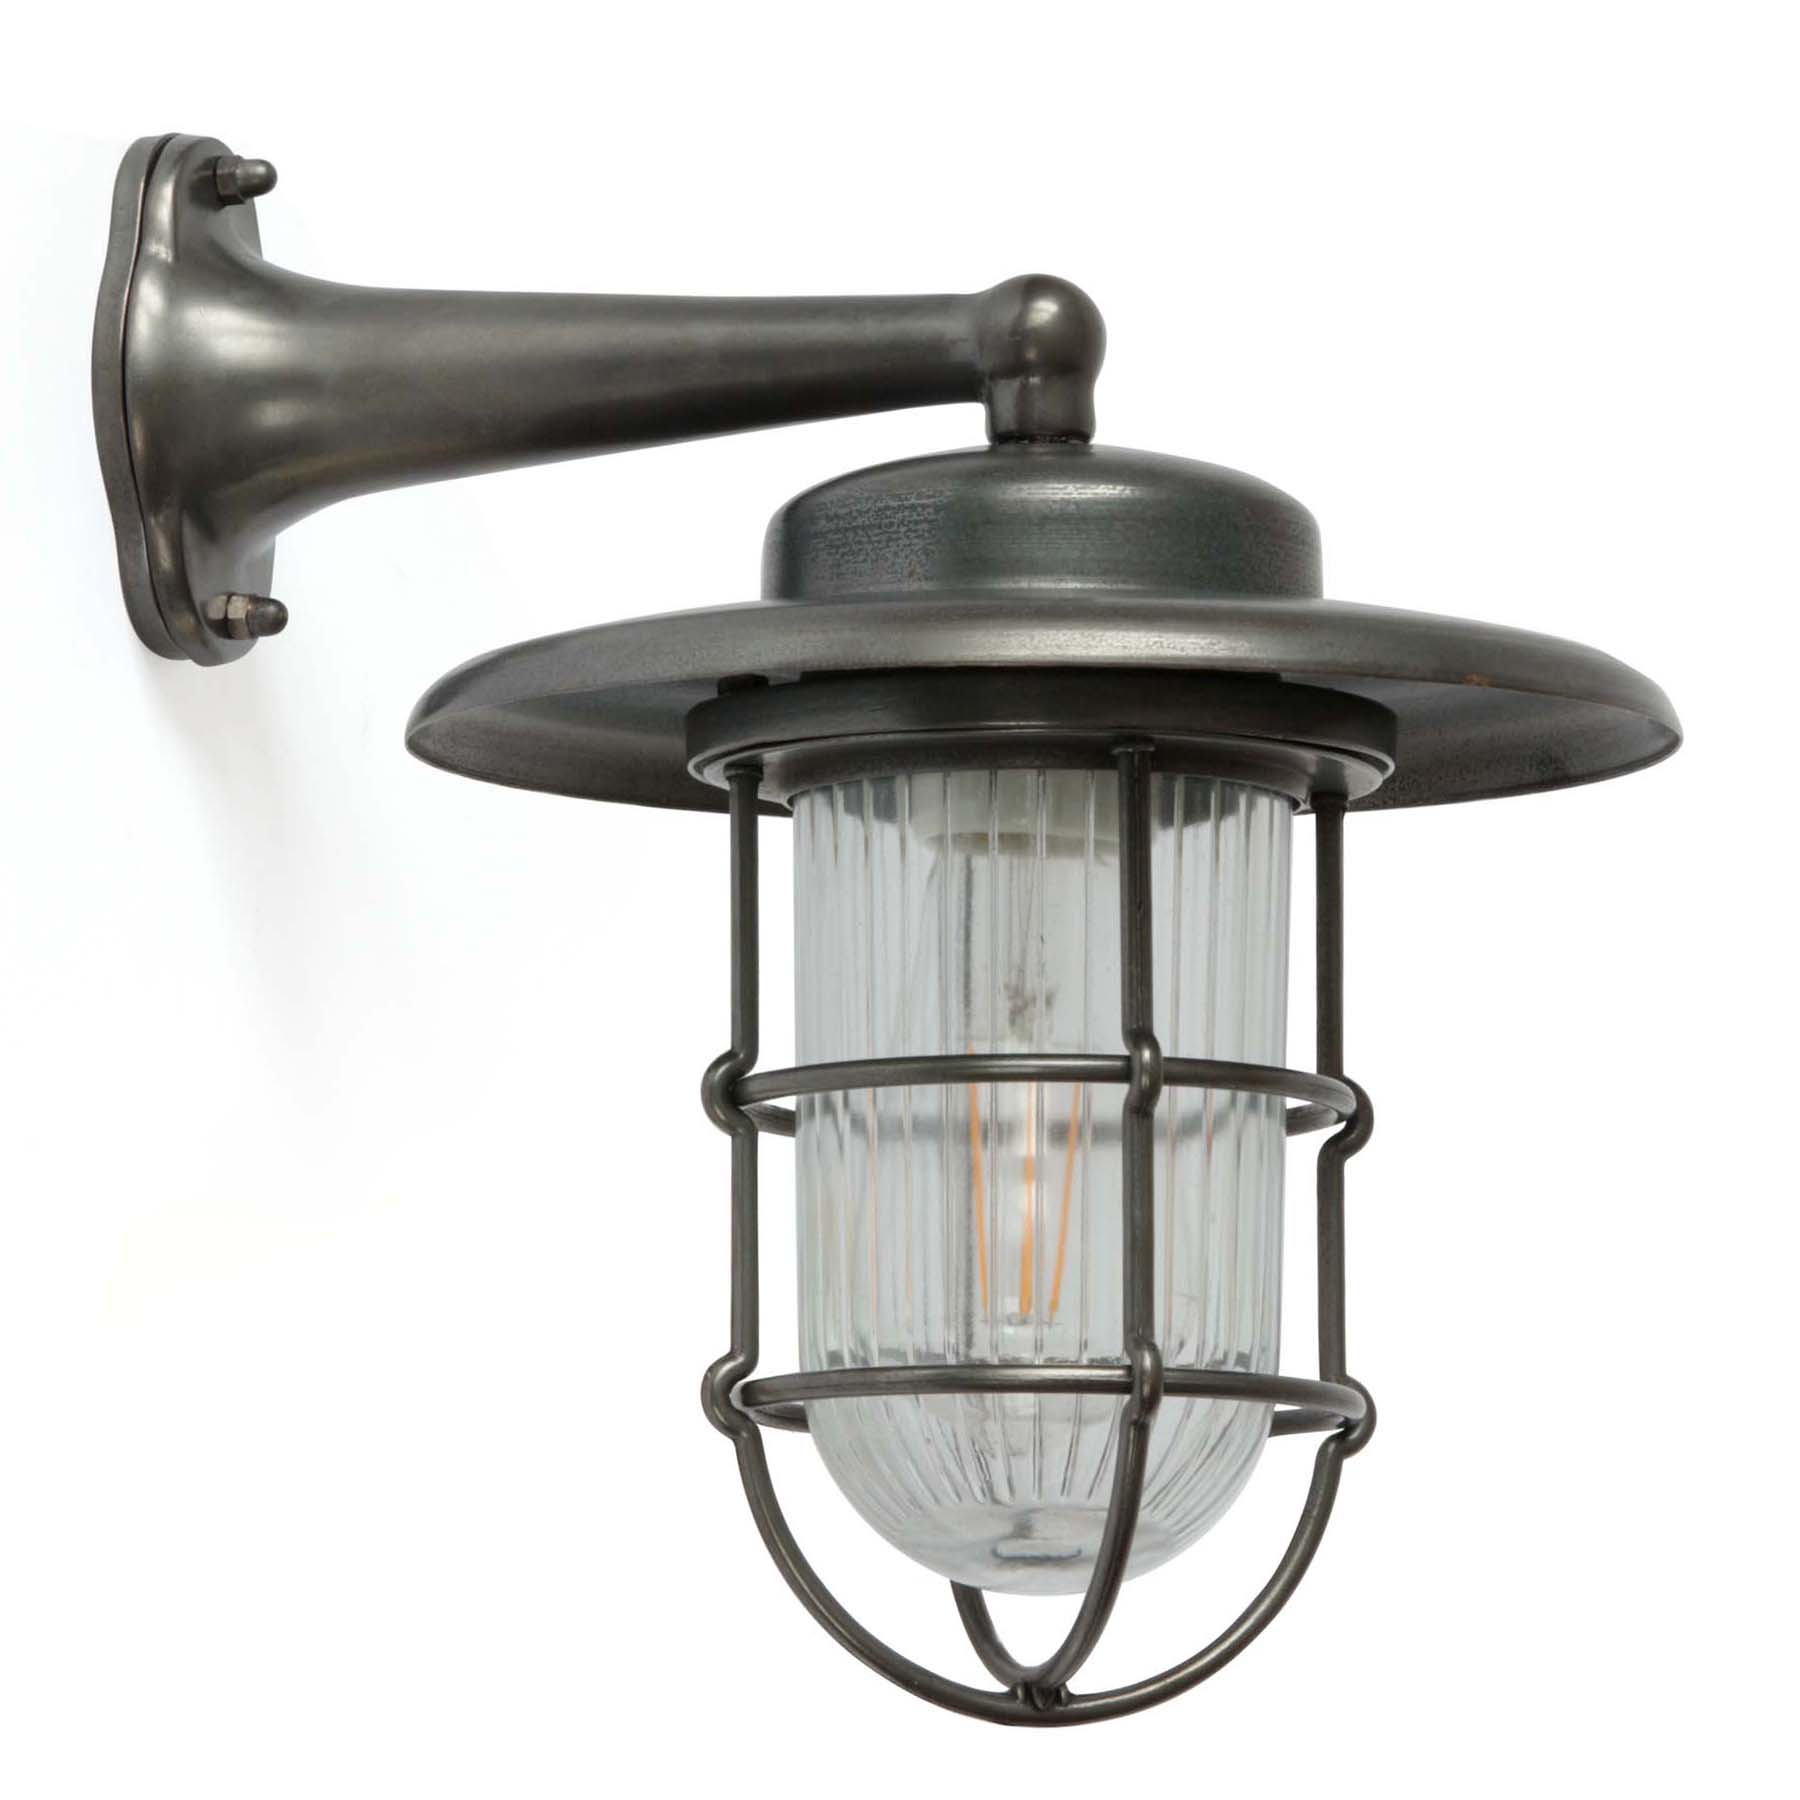 Outdoor brass wall light N° 753 with protective glass